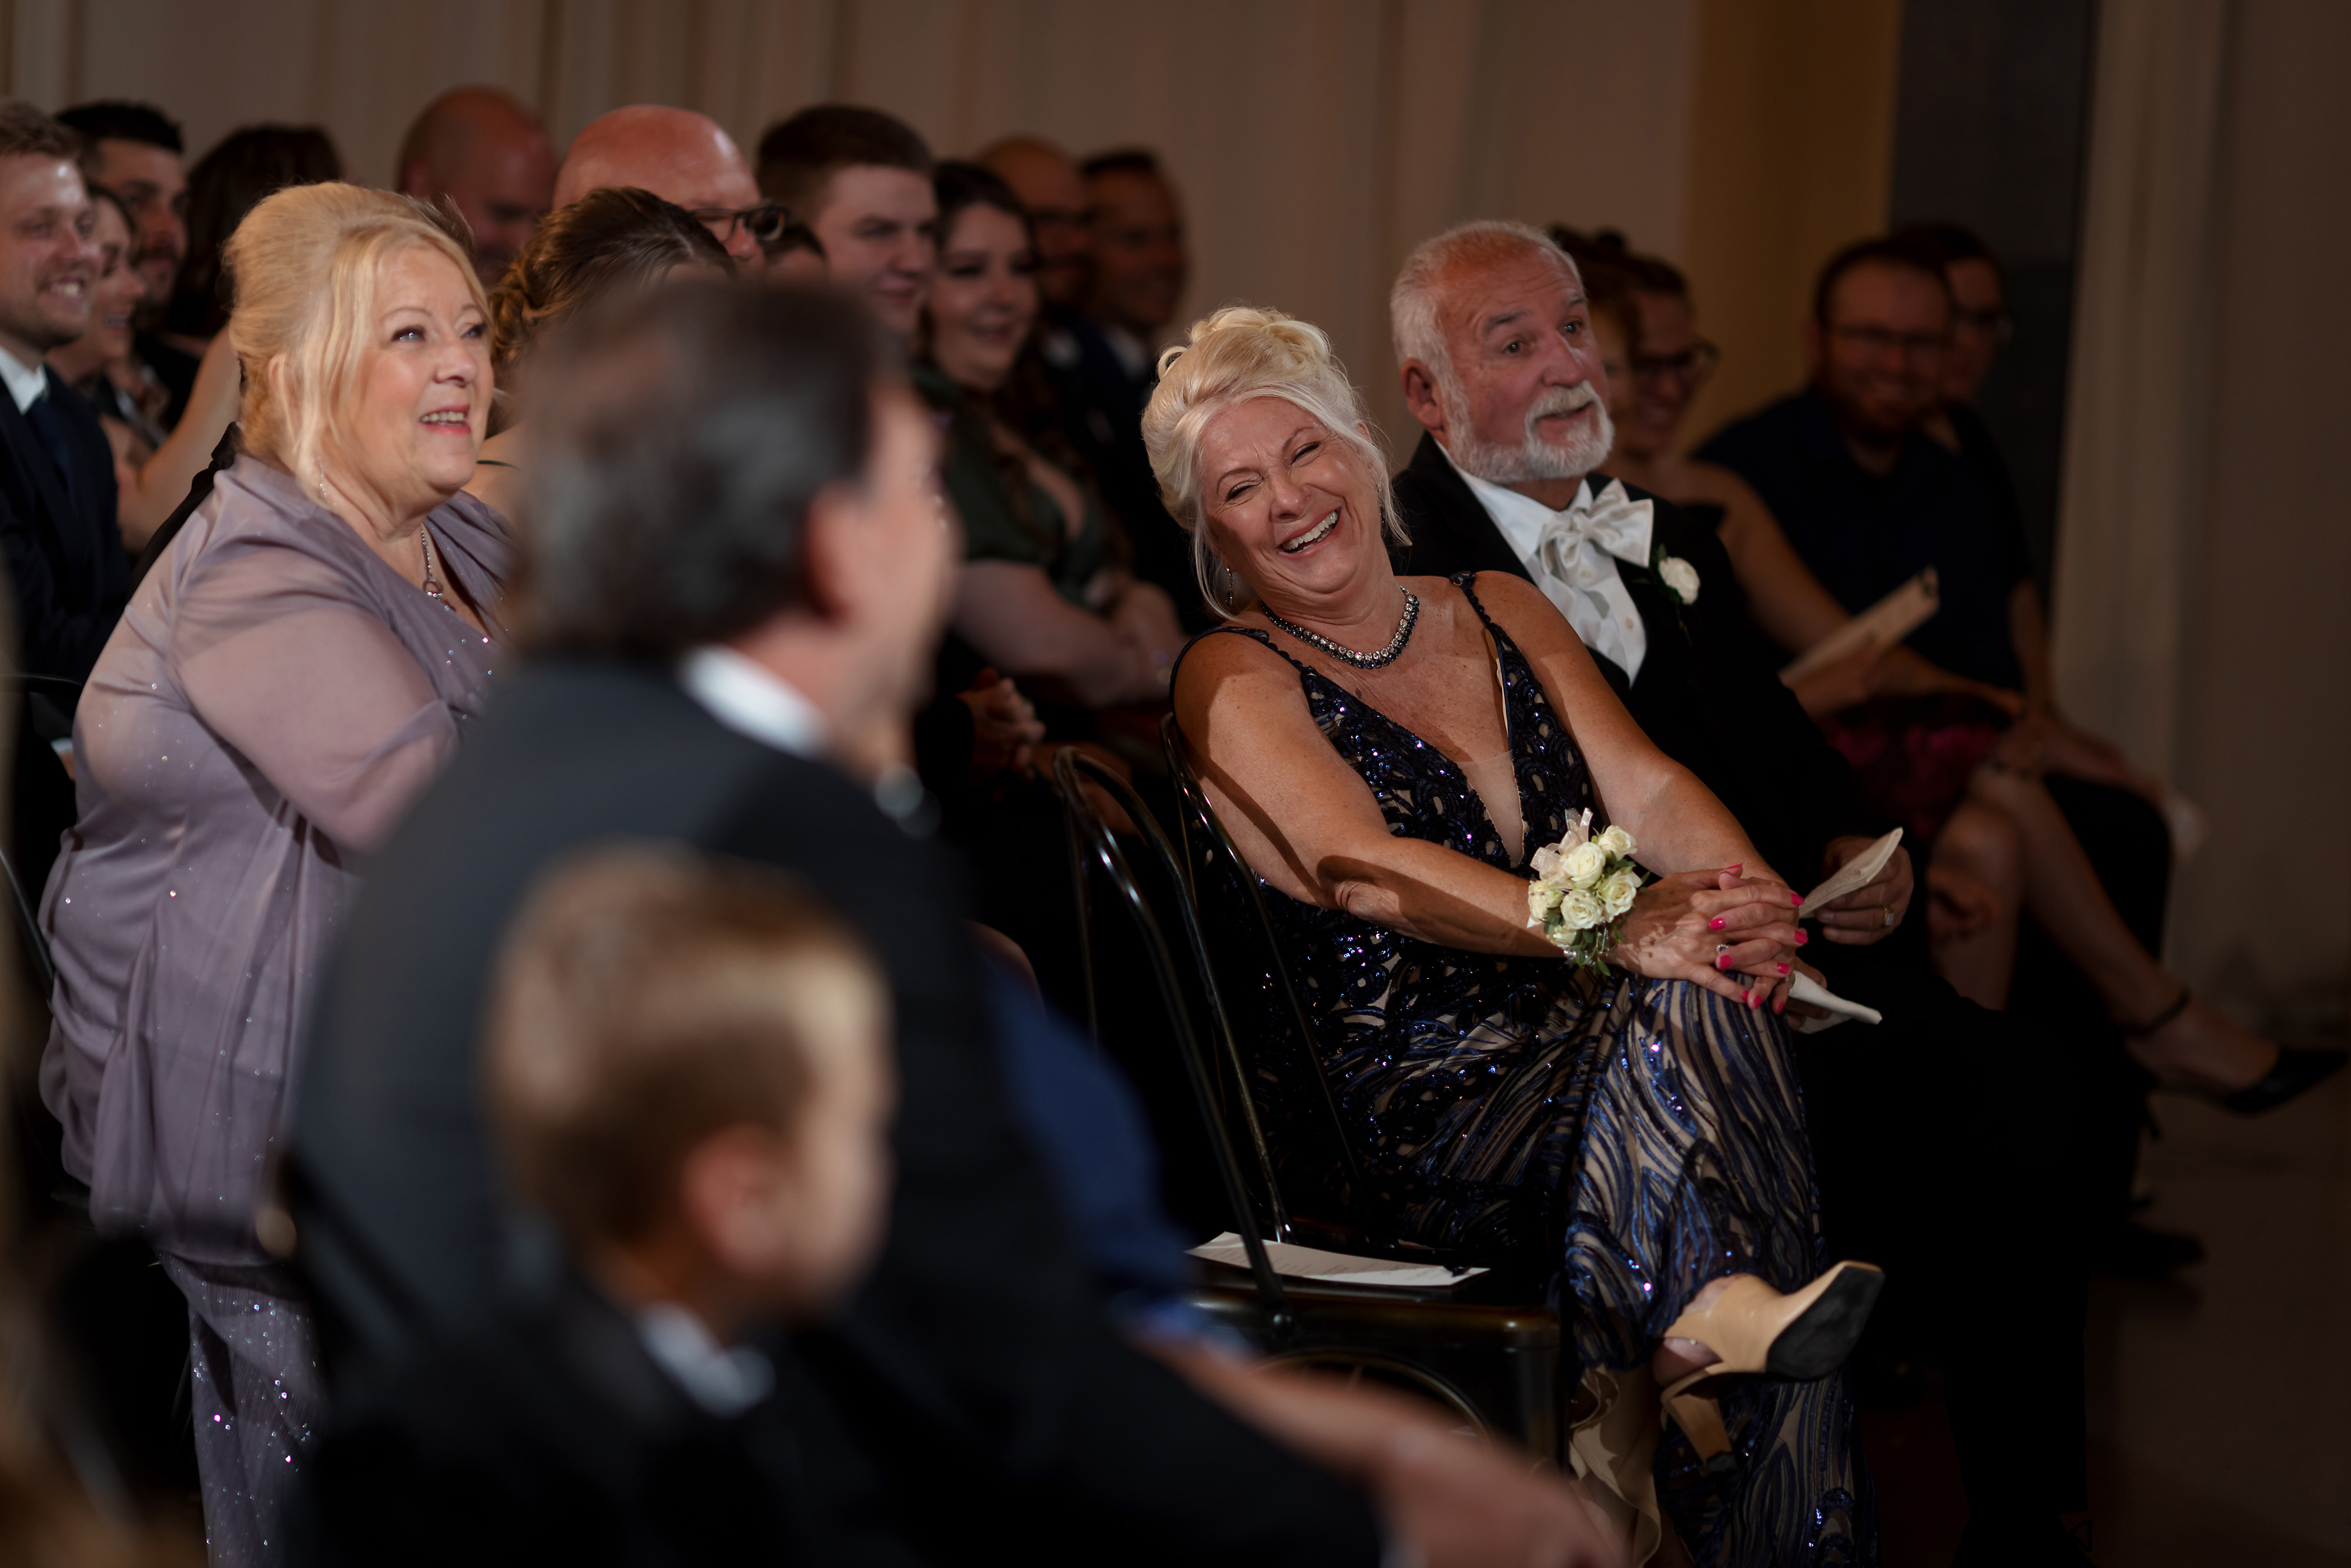 Parents and guest laugh during wedding ceremony at Artifact Events in Chicago's Ravenswood neighborhood.